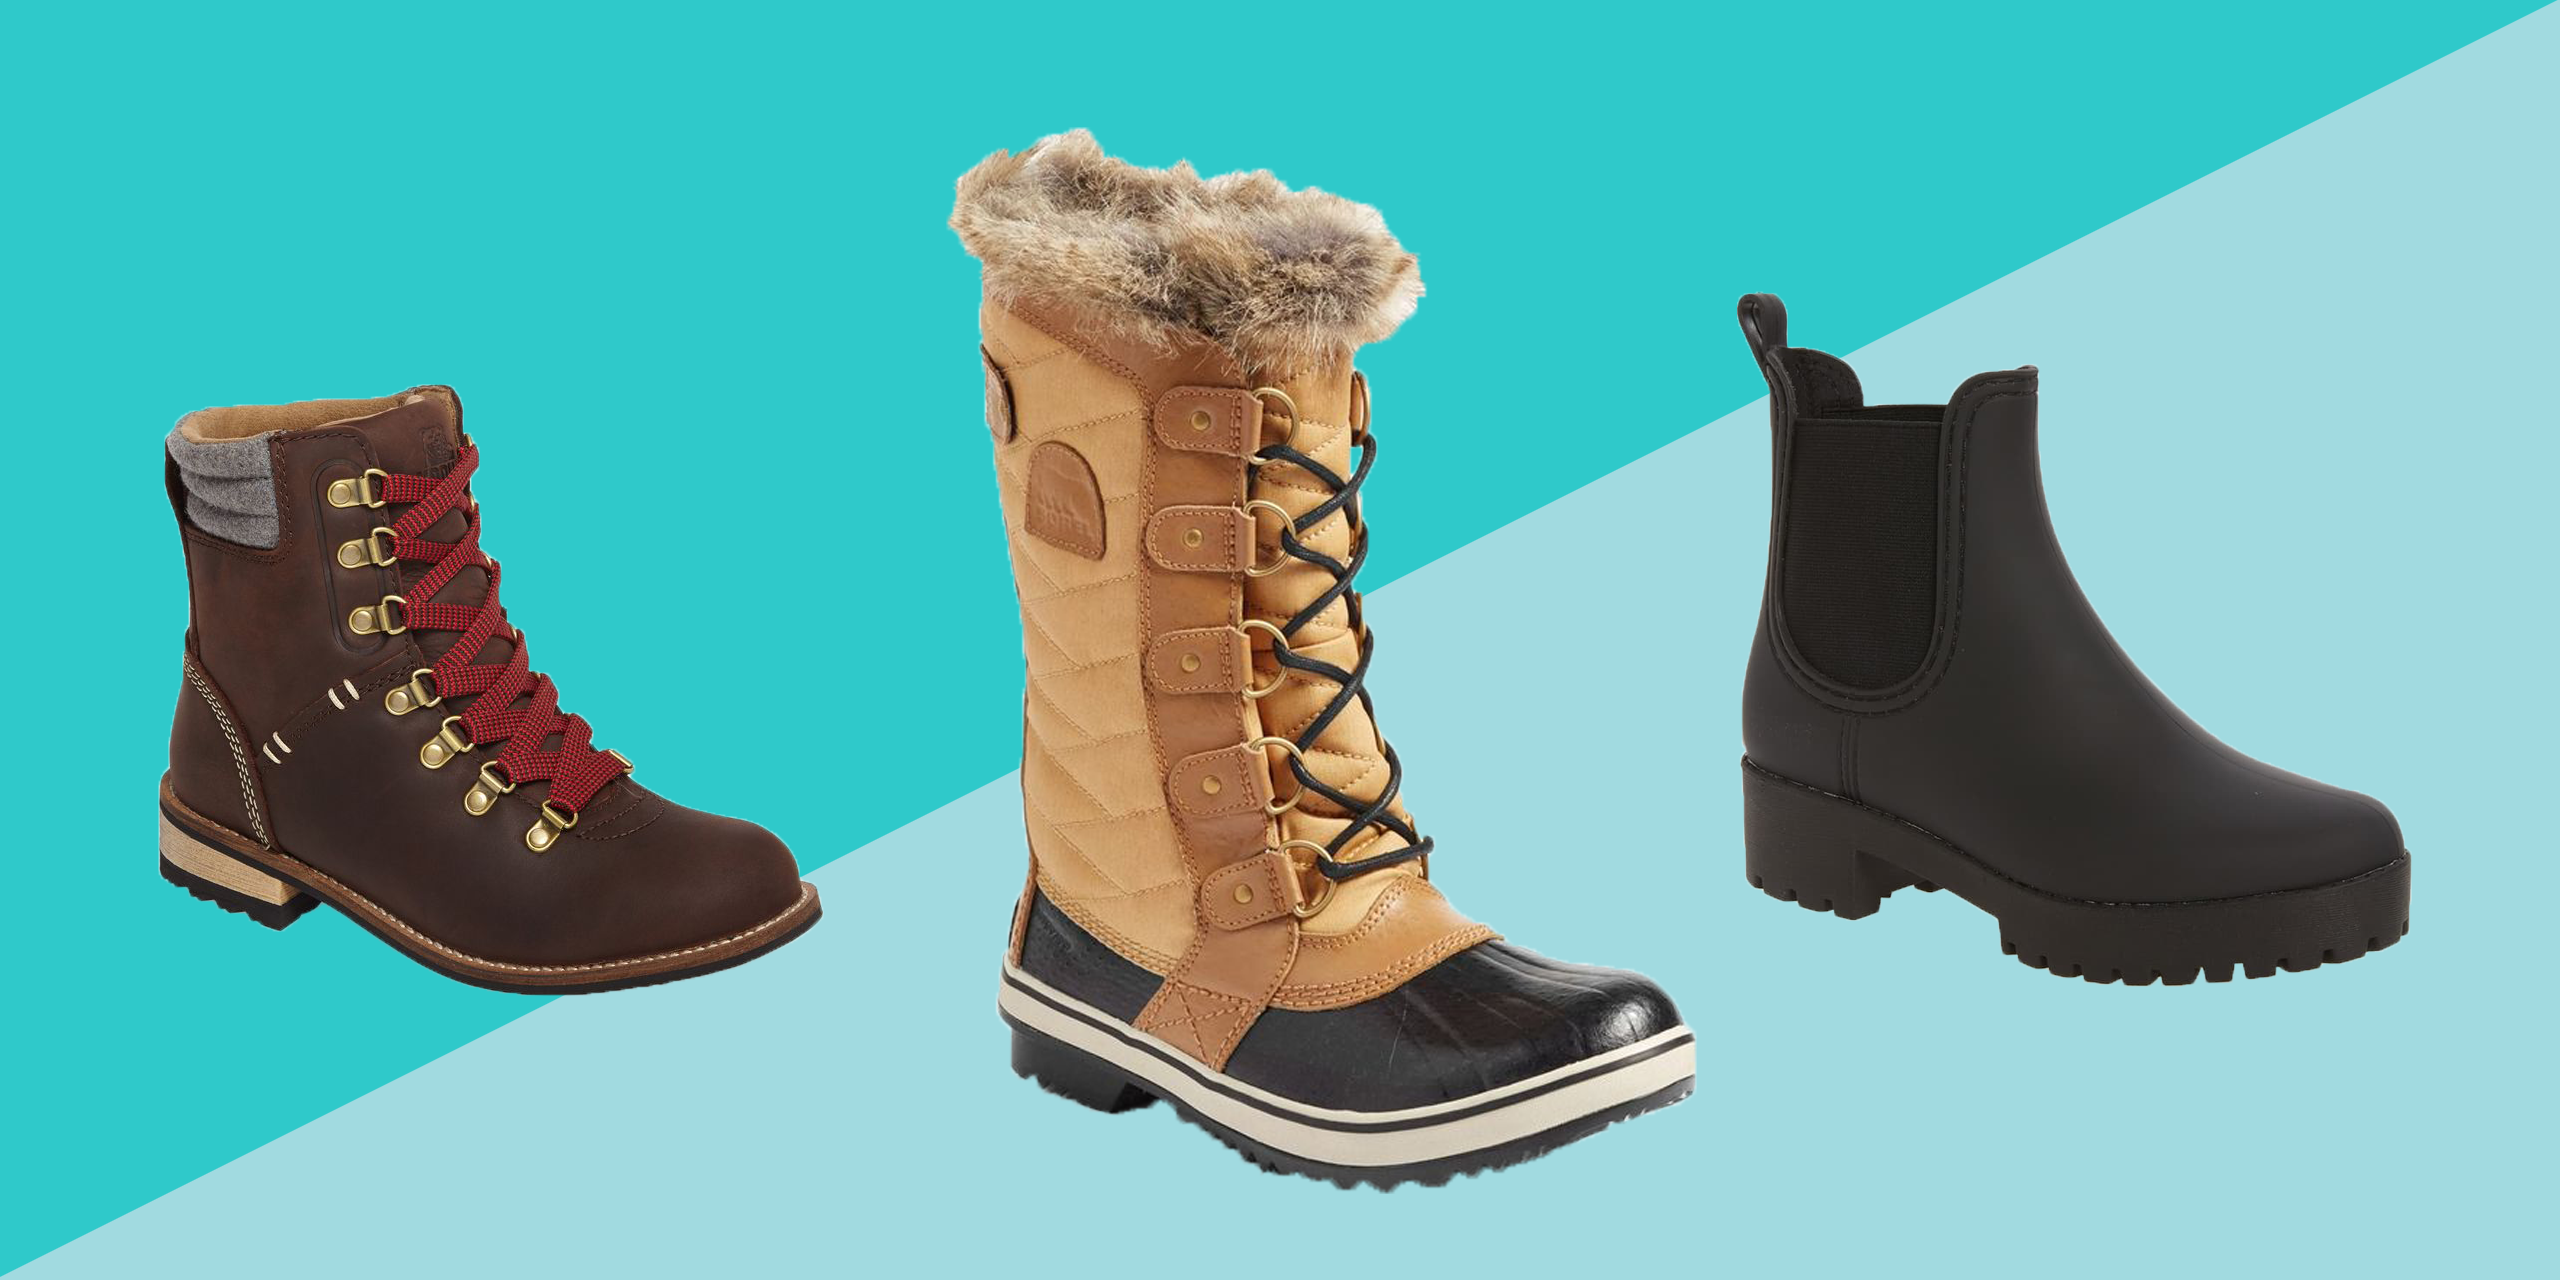 20 Best Winter Boots to Buy in 2020 